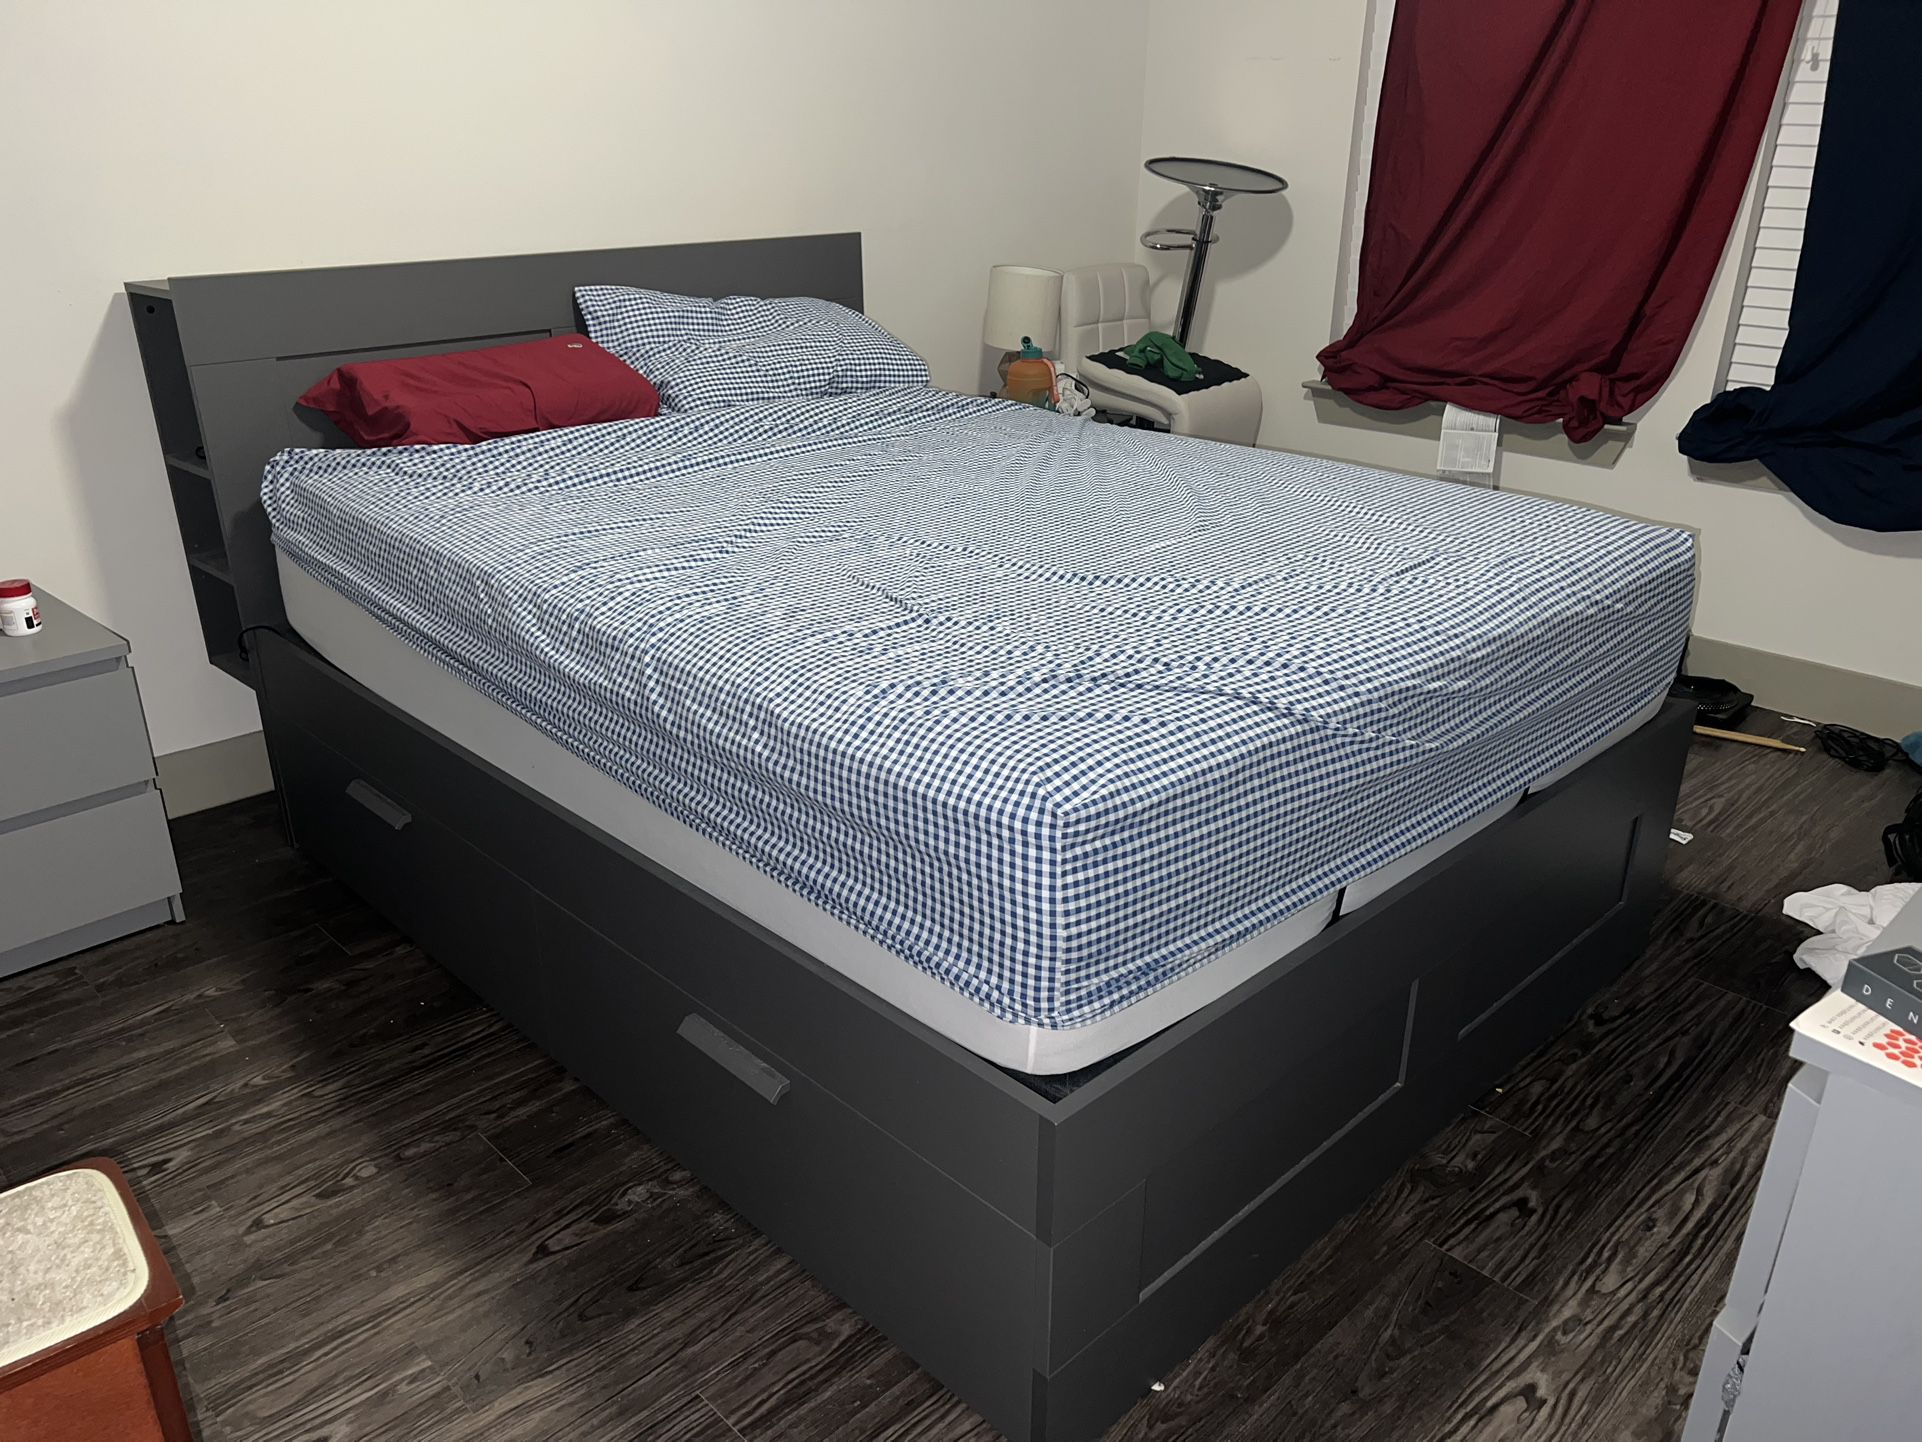 high queen bed frame with headboard